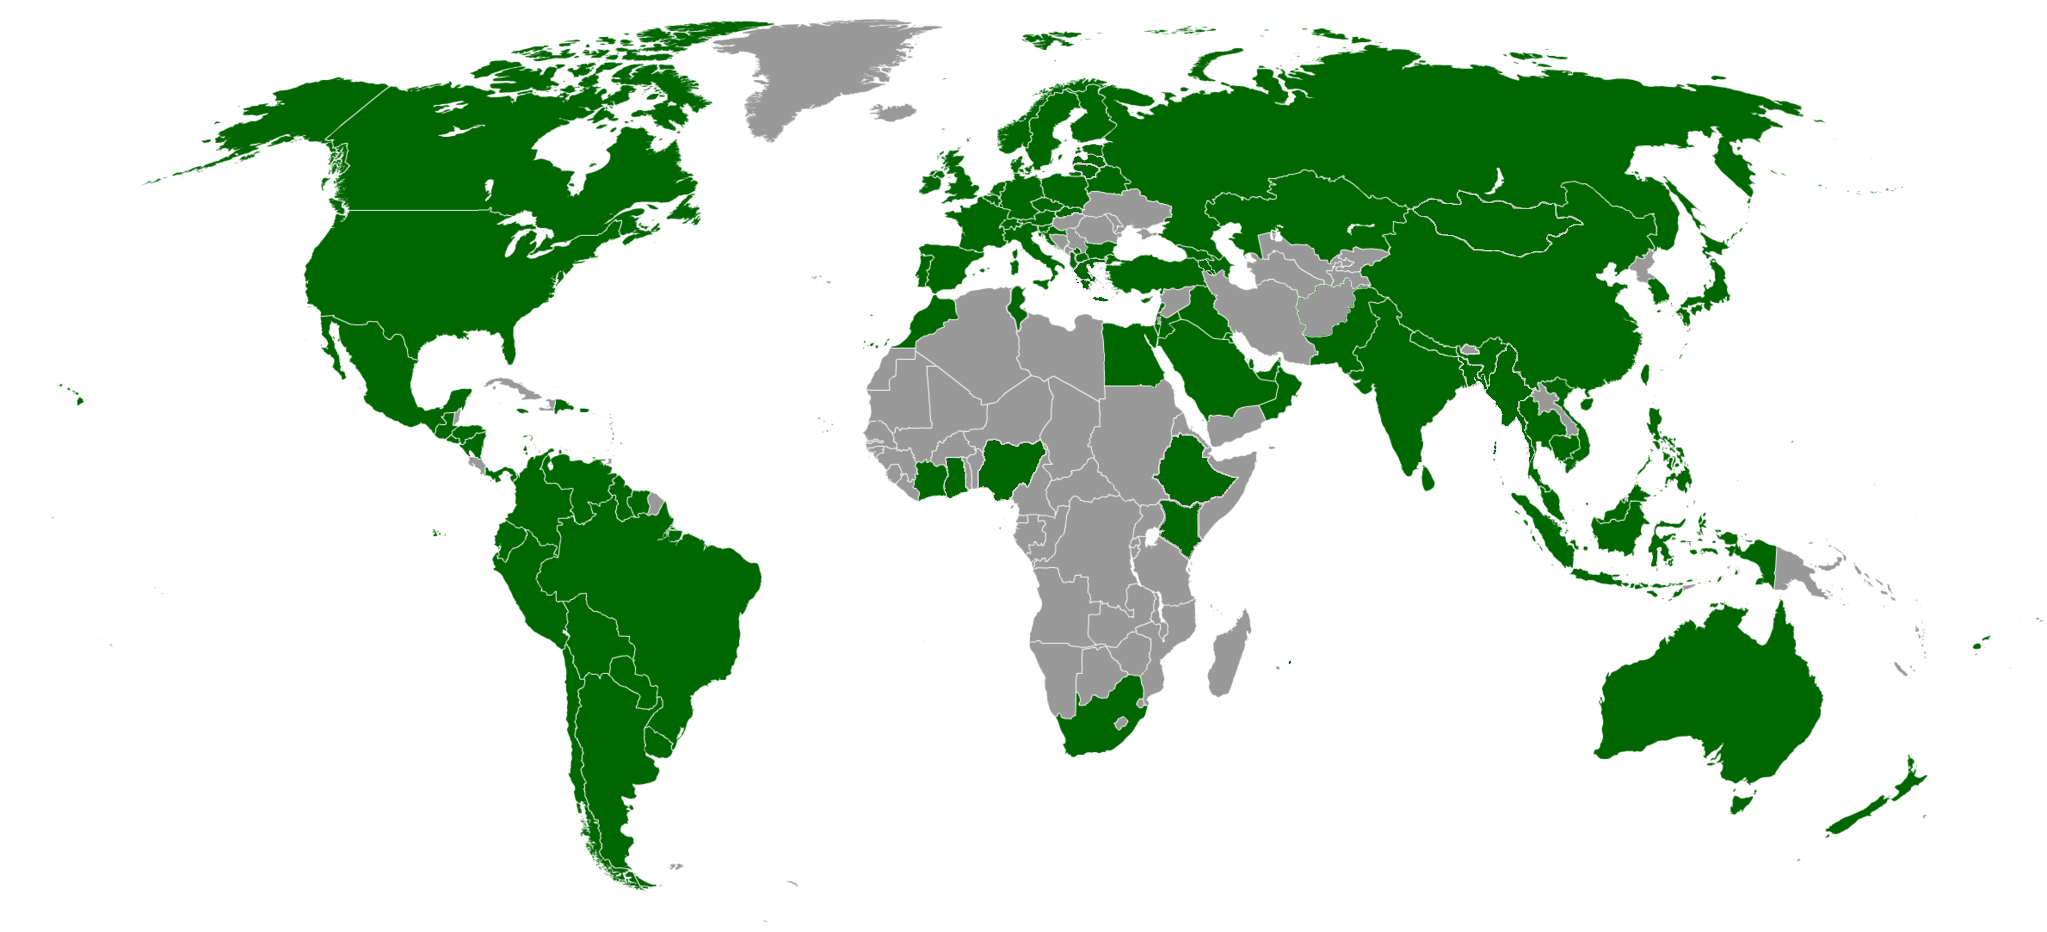 File:Burger King world map.png - Wikimedia Commons